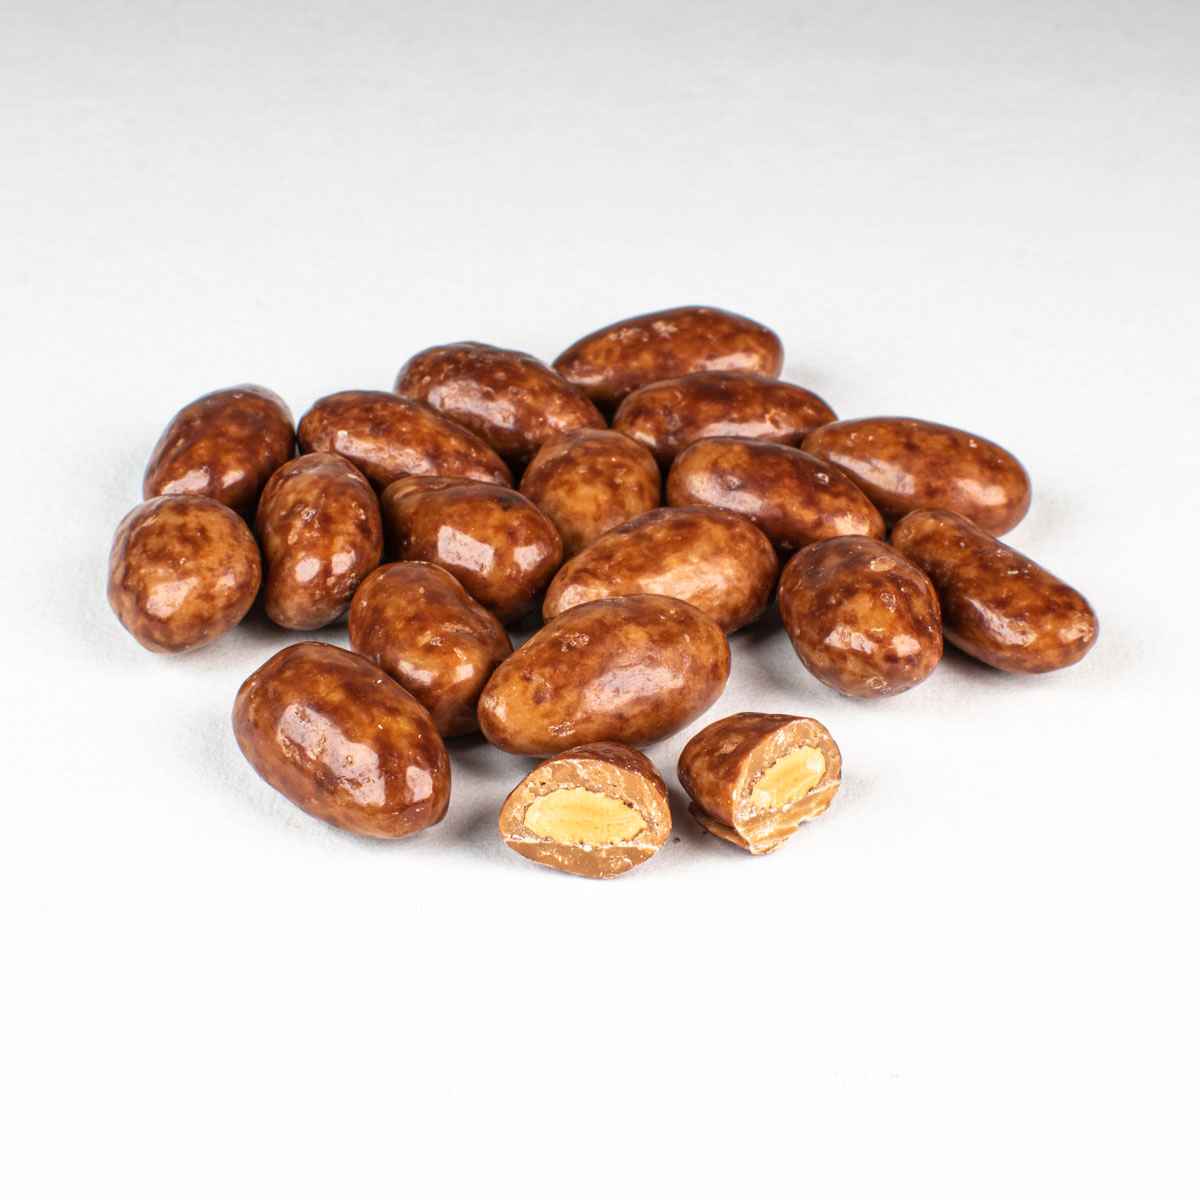 The Fine Harvest Belgian Chocolate Salted Caramel Coated Nuts Almonds